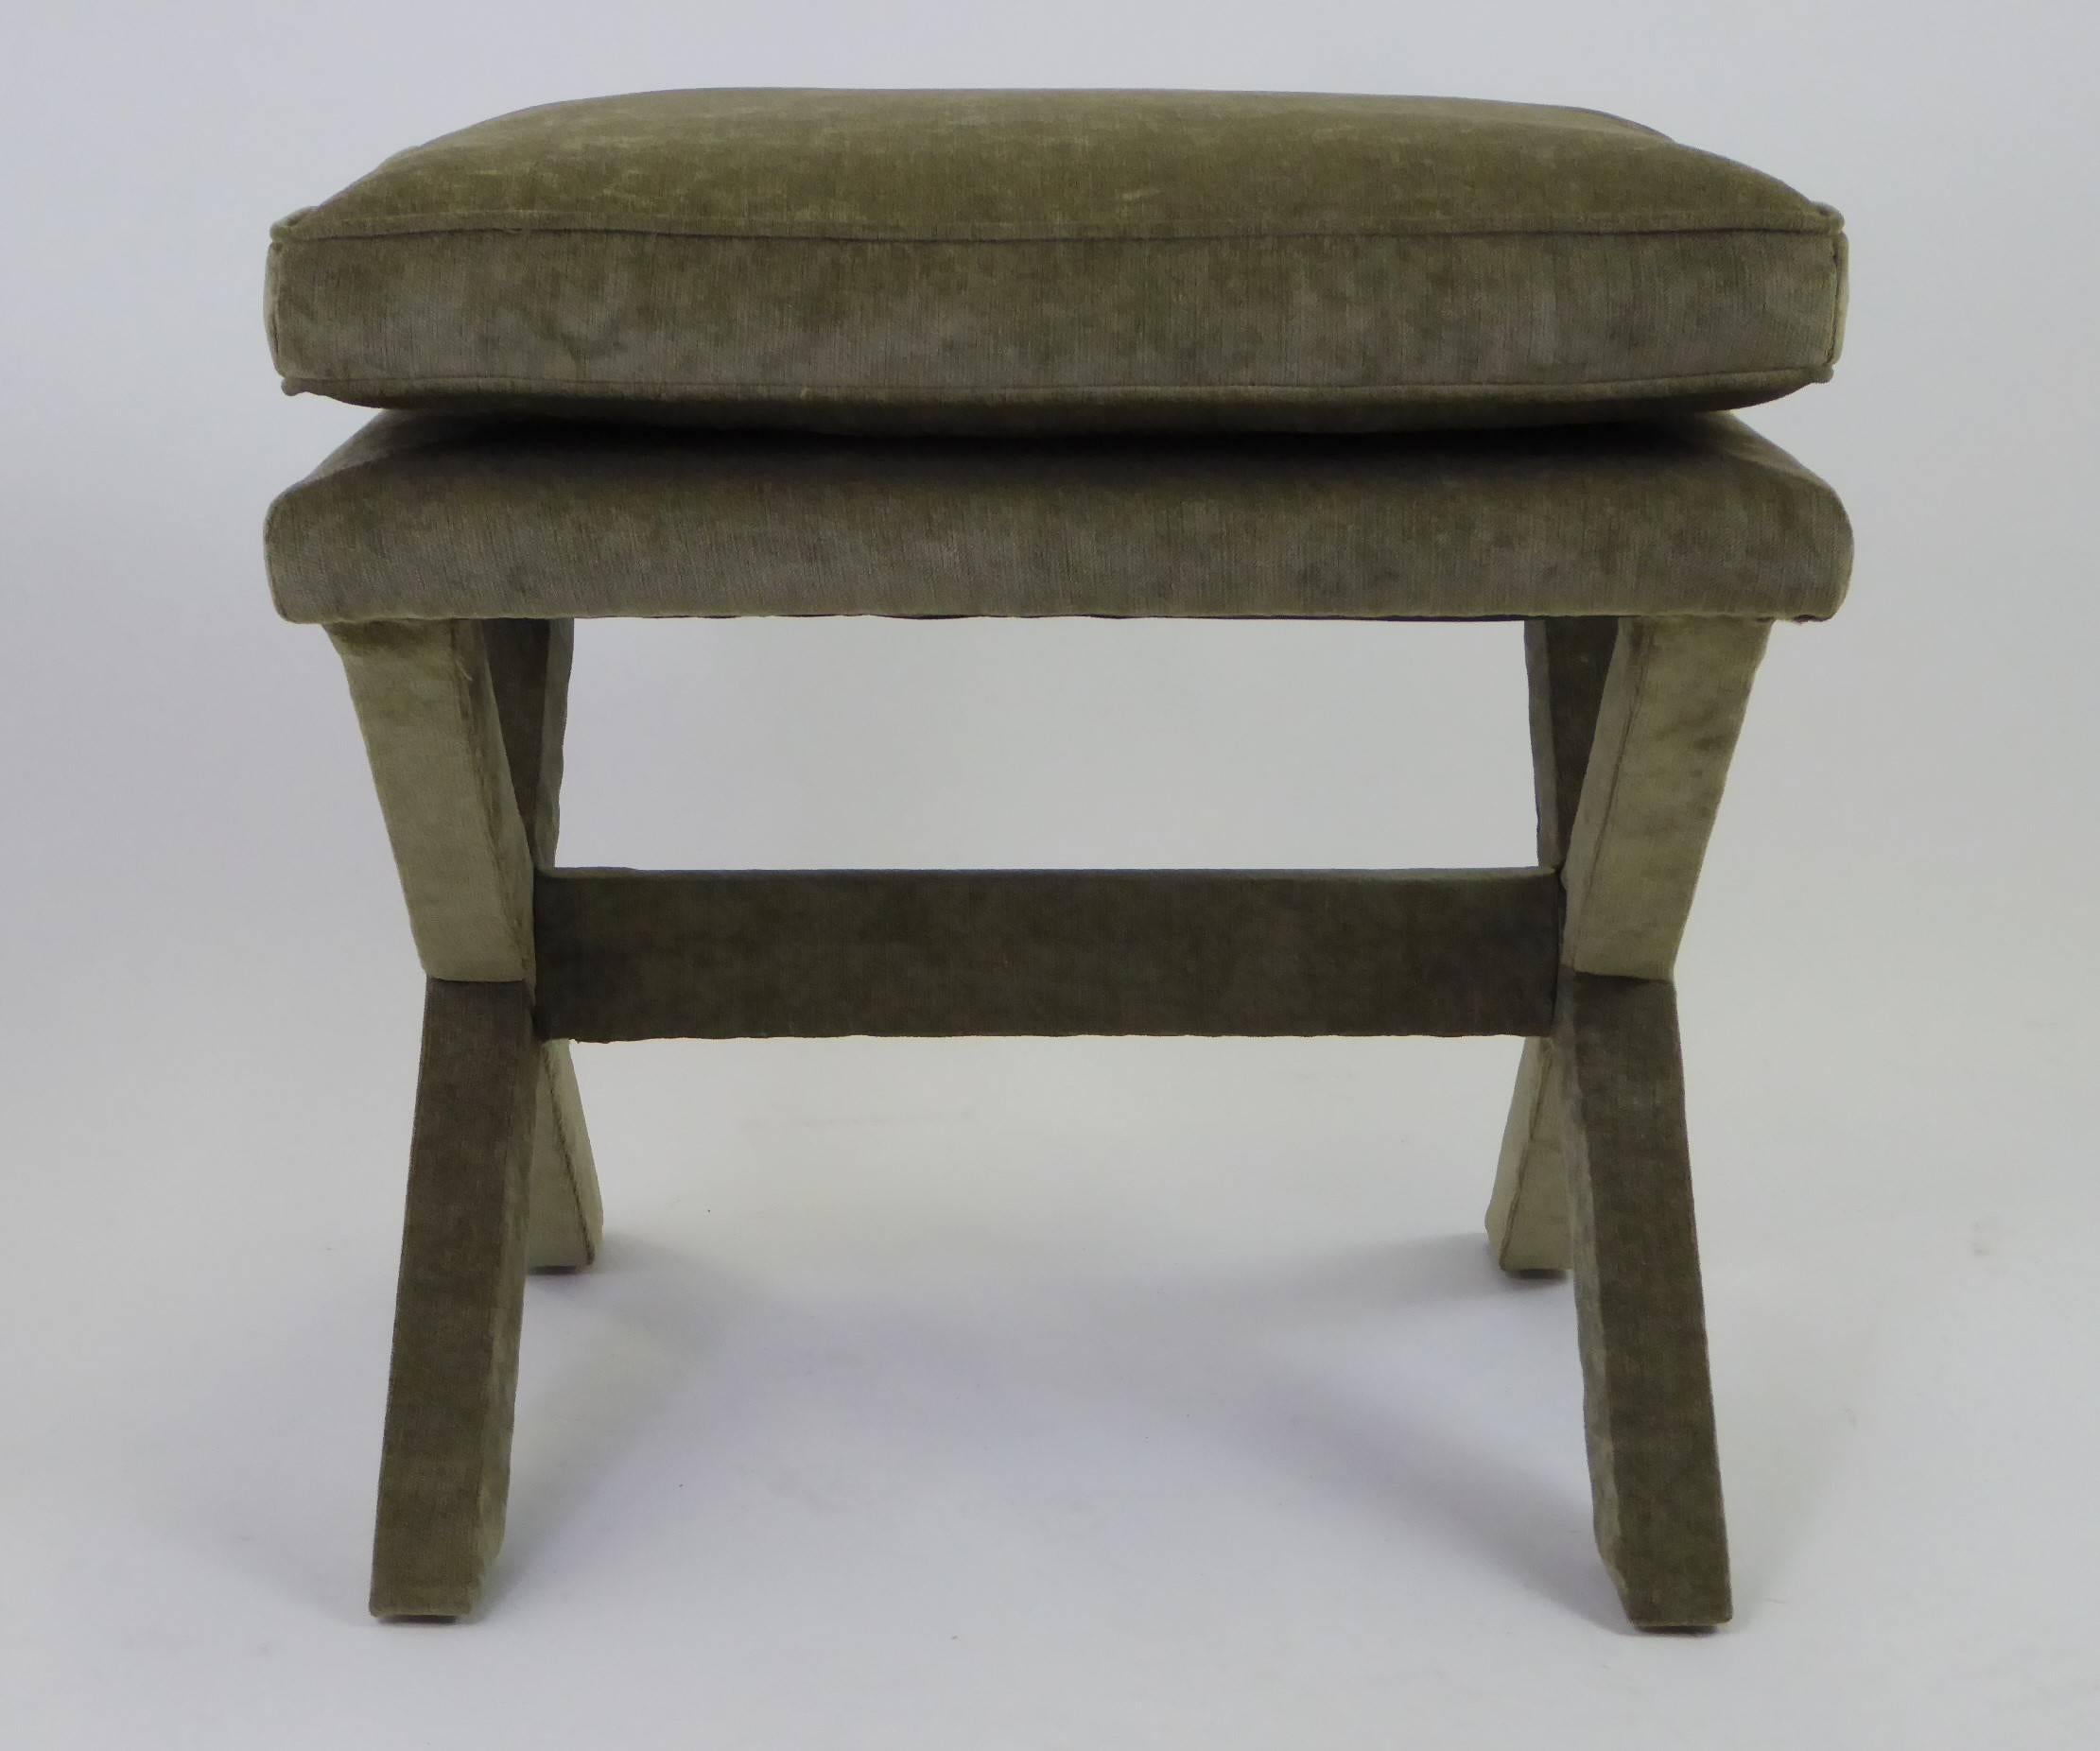 Elegant and iconic form associated with and designed by Billy Baldwin, this 1960s X-bench or stool has been reupholstered in an olive green velvet.
Measures: 21 inches x 18 1/2 inches x 21 inches high.